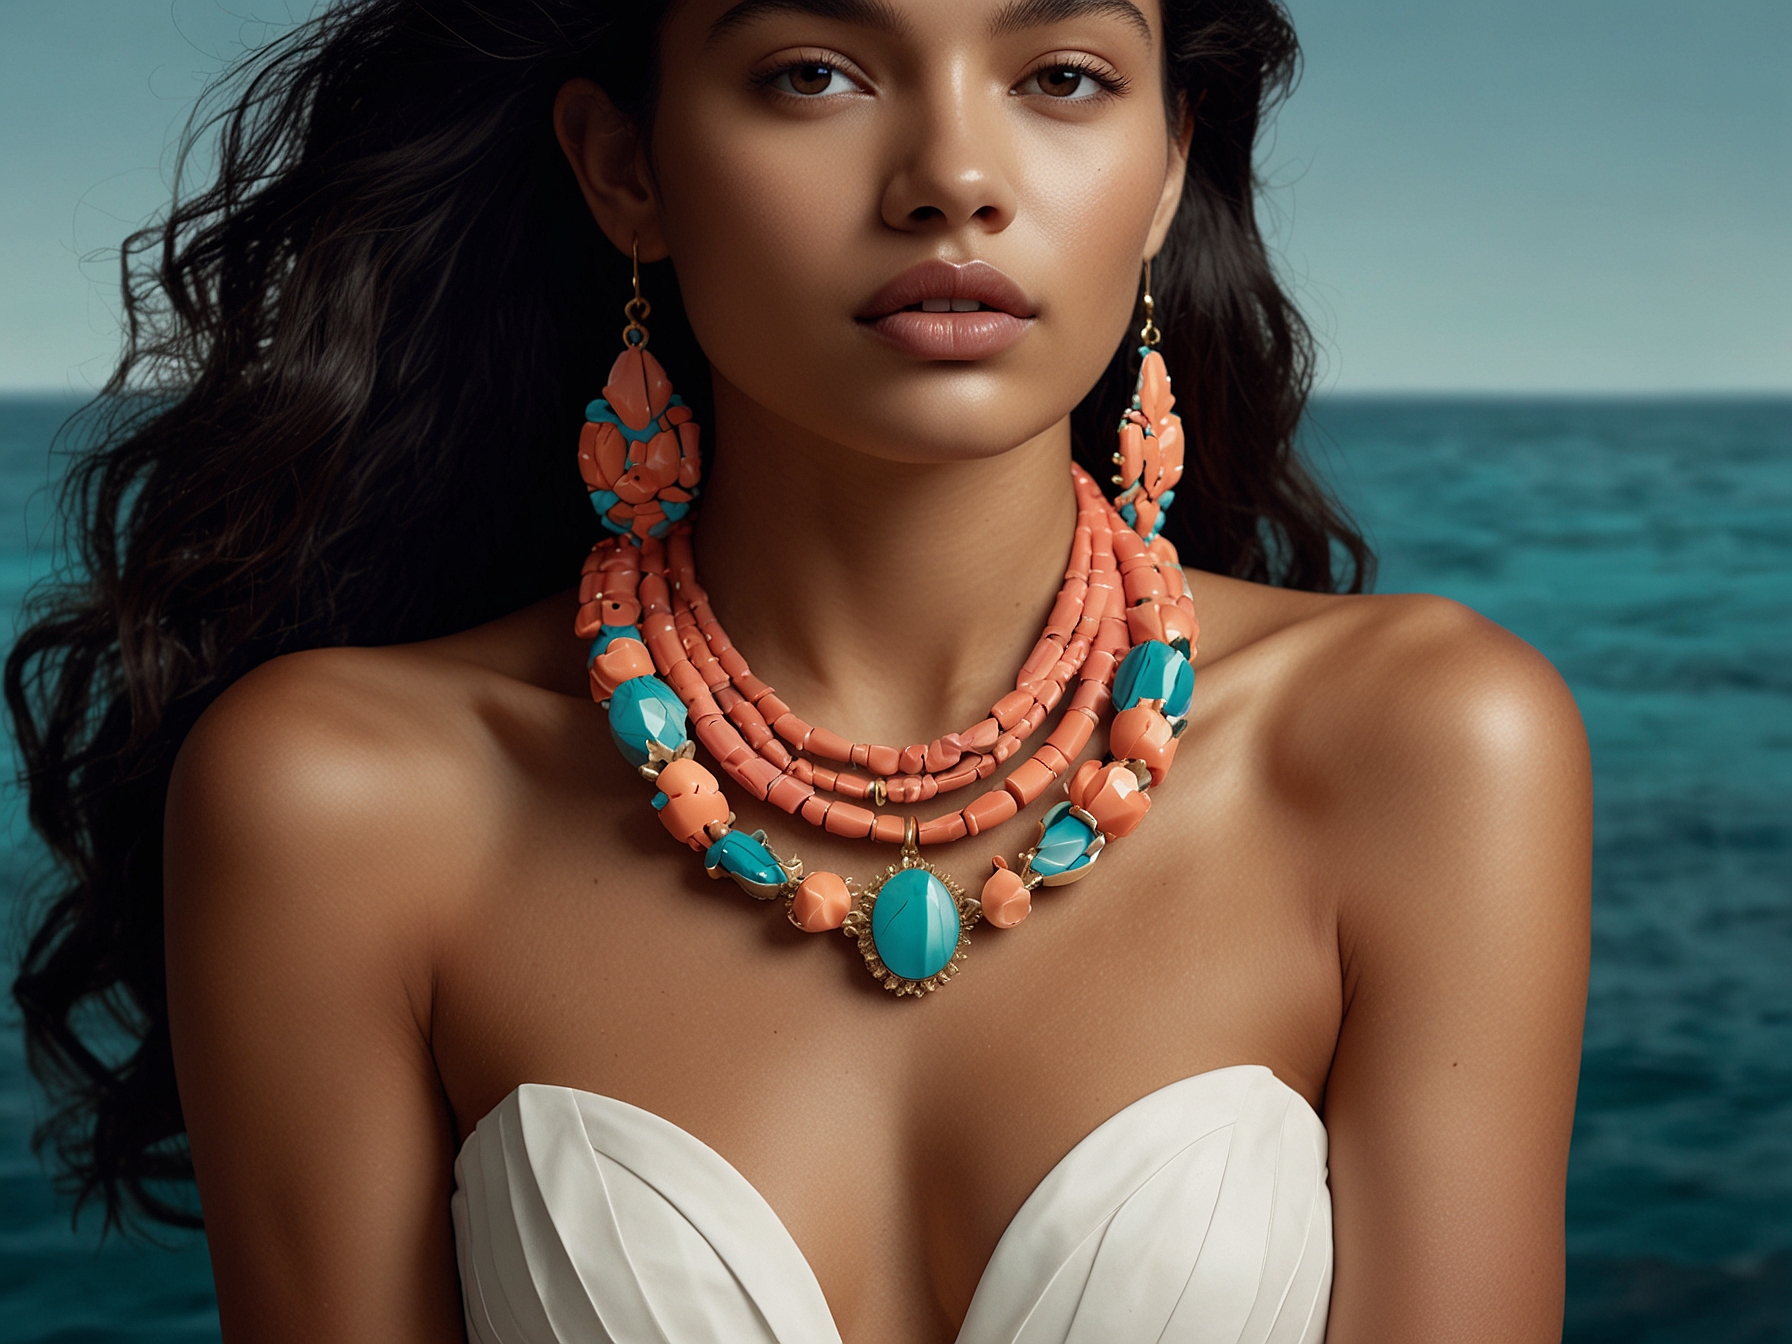 Ken Samudio's eco-friendly jewelry designs mimicking coral reefs and marine life, created from recycled plastic and indigenous materials, demonstrating his sustainable approach to fashion.